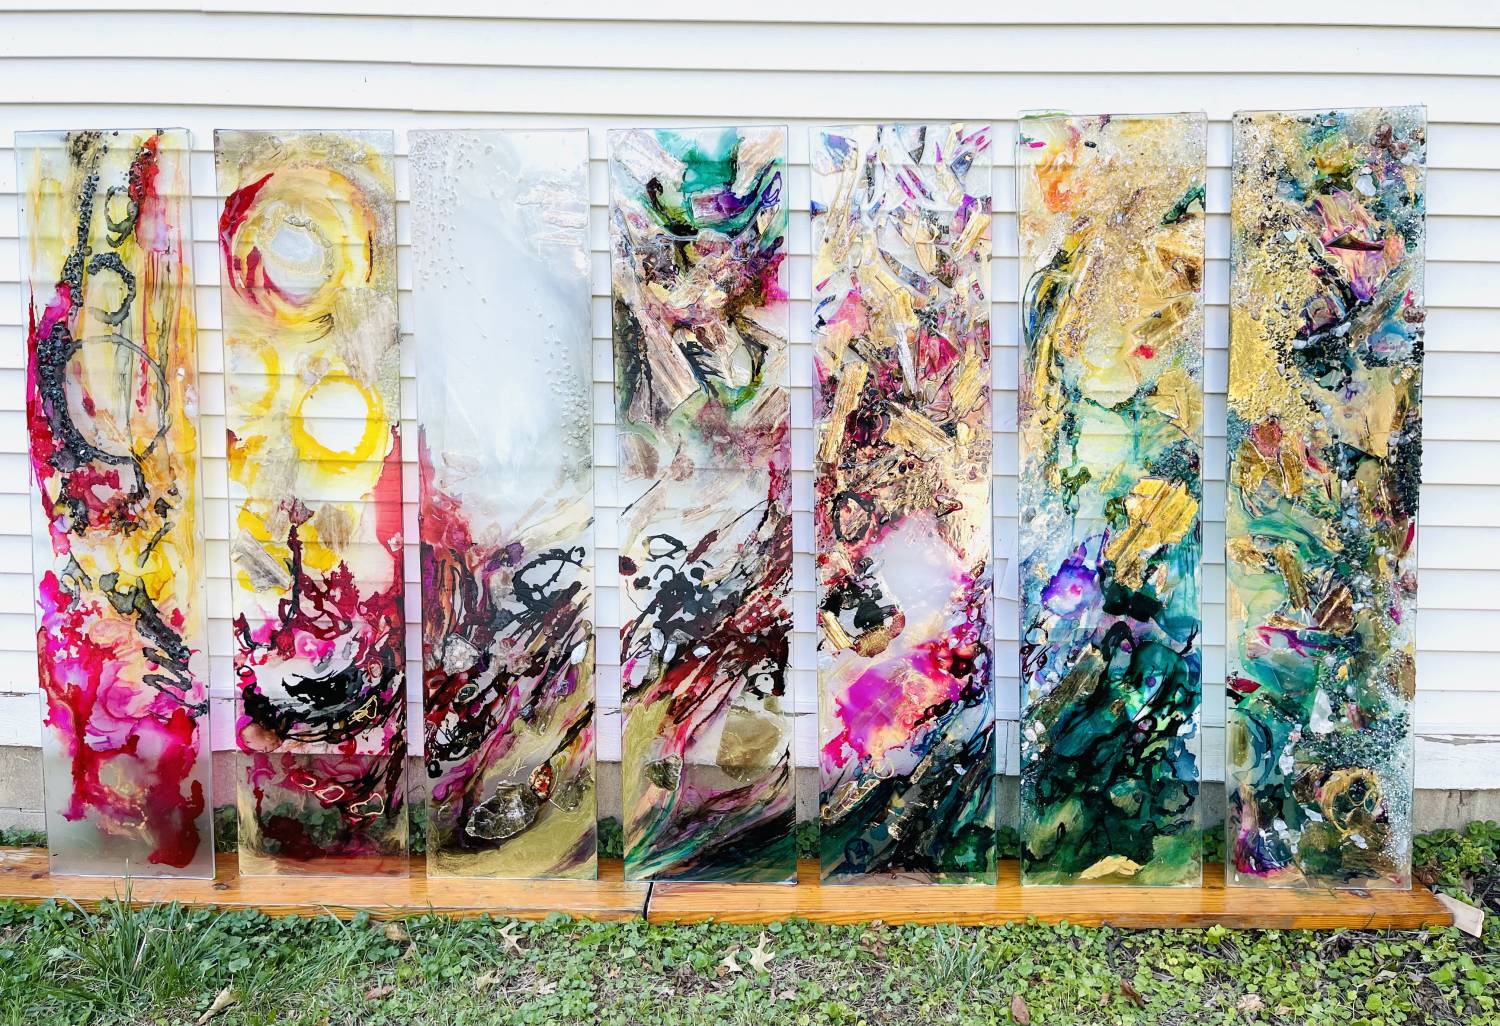 Photo of artwork in 7 tall skinny clear panels. Abstract & multicolored, the artwork is continuous from one panel to the next.